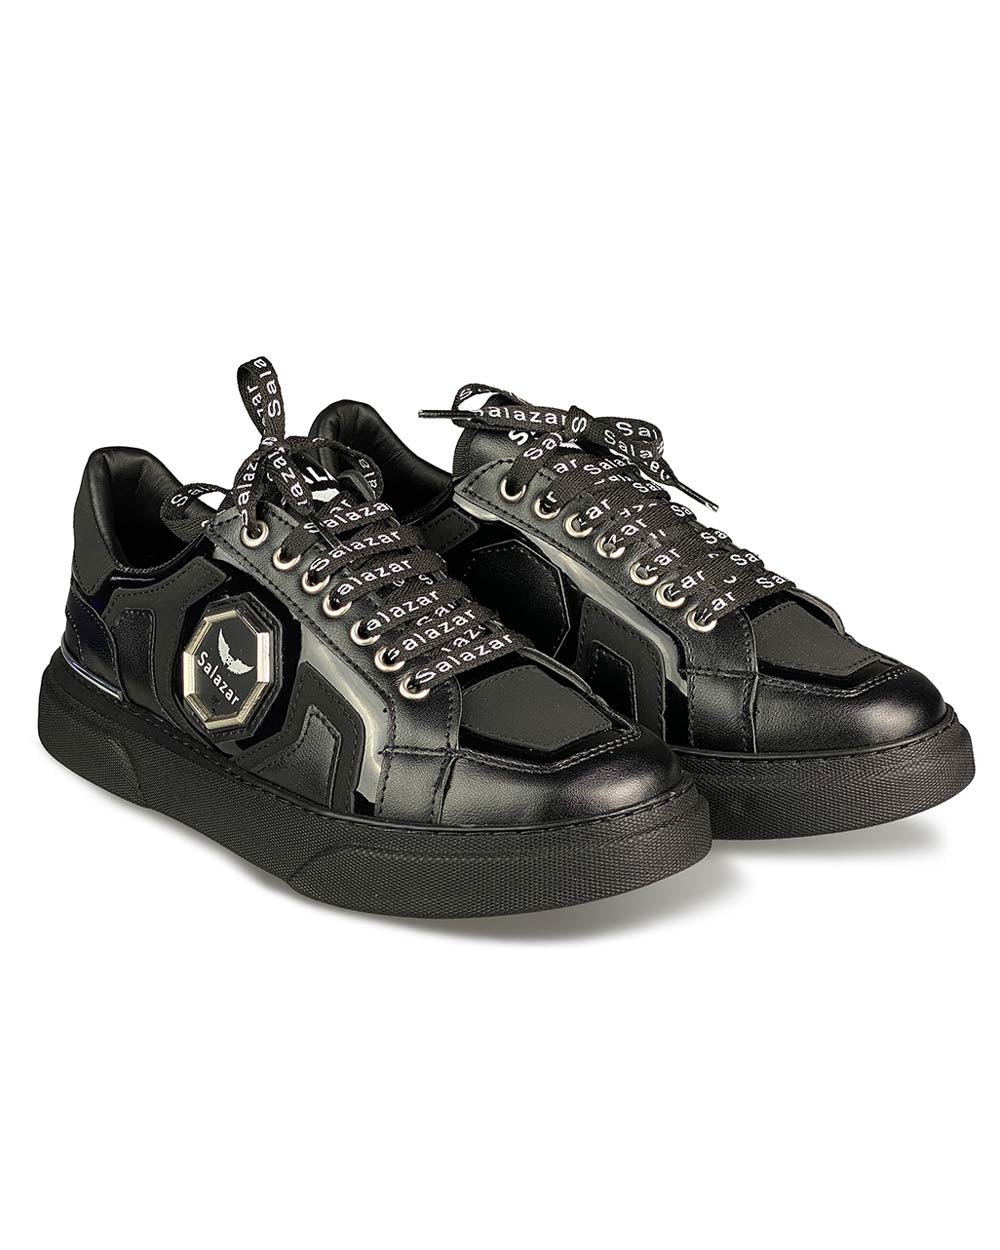 Trendy black sneakers with laces with white writing and metal badge and black sole for men